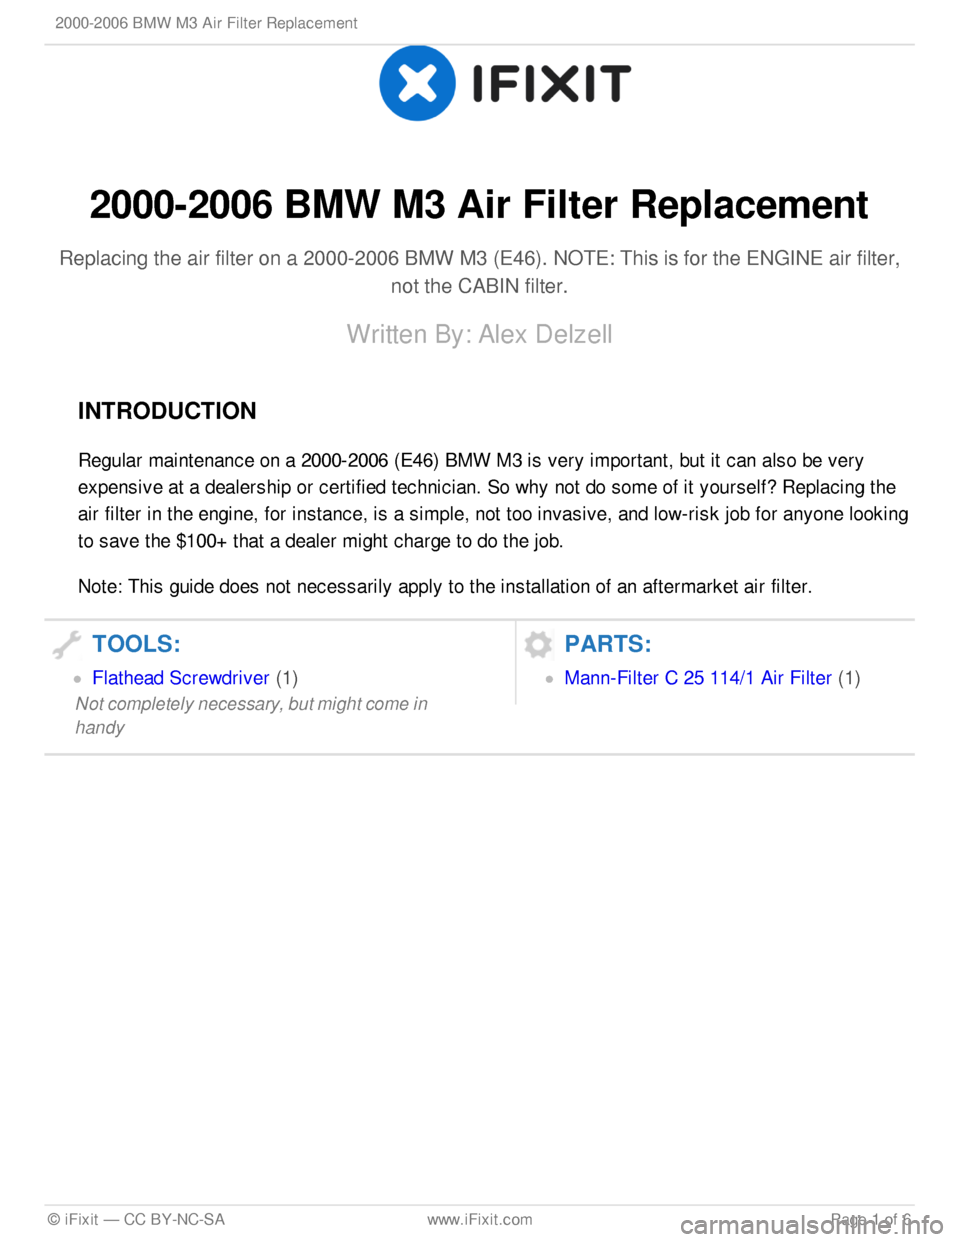 BMW M3 COUPE 2000 E46 Air Filter Replacement 2000-2 006 B M W  M 3 A ir  F ilt e r R ep la cem en t
Repla cin g th e a ir  filt e r o n a  2 000-2 006 B M W  M 3 ( E 46). N O TE : T his  is  fo r th e E N G IN E a ir  filt e r,
not th e C ABIN  